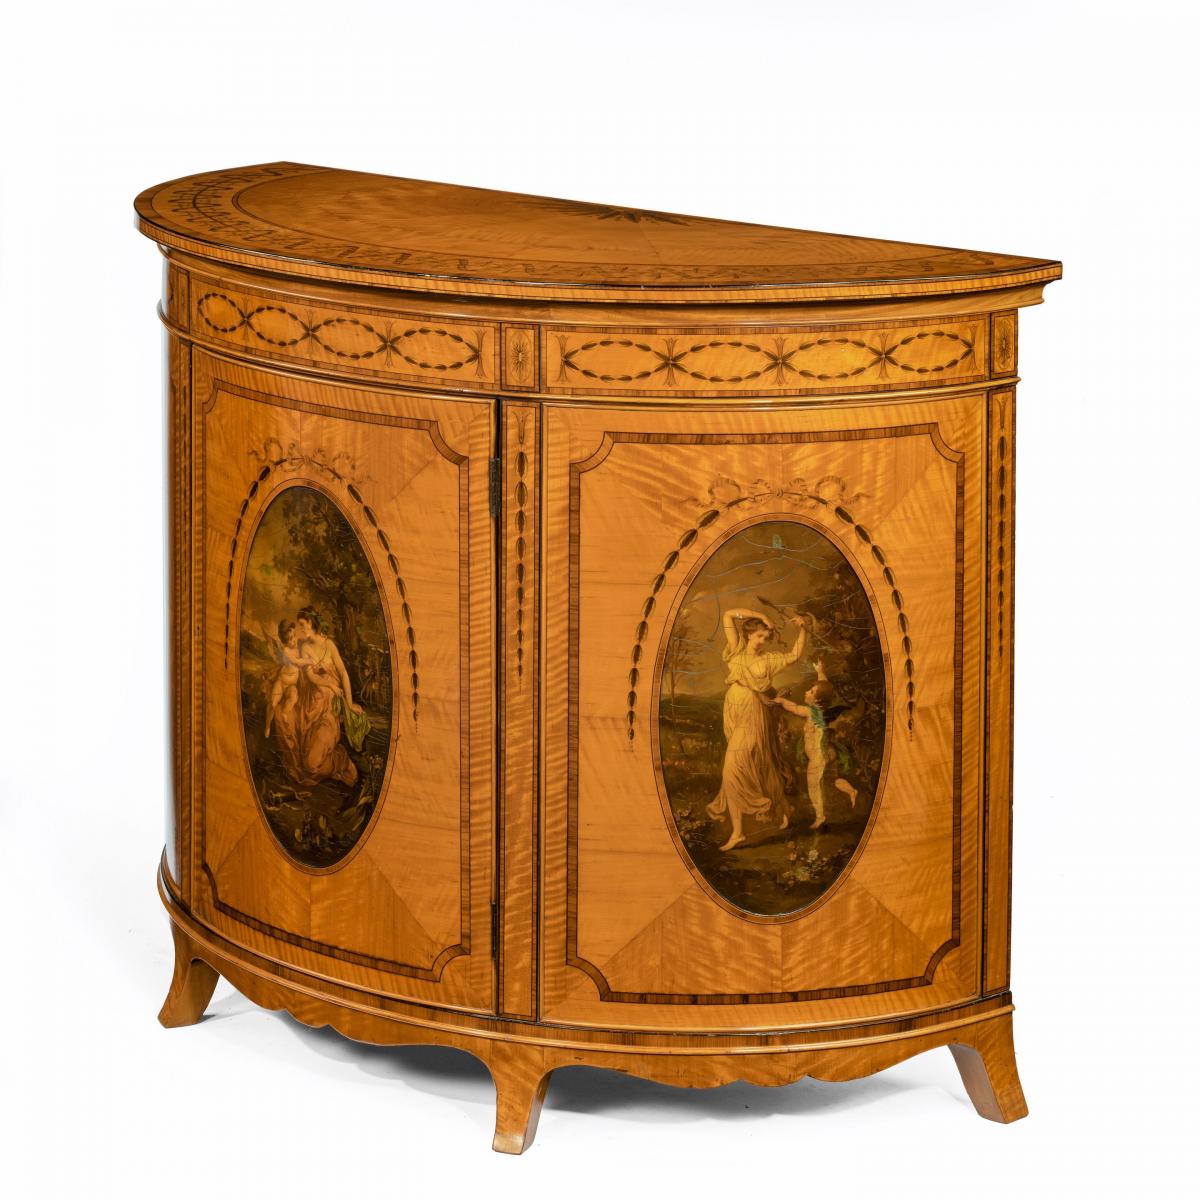 A fine Victorian Sheraton revival West Indian satinwood demi lune commode